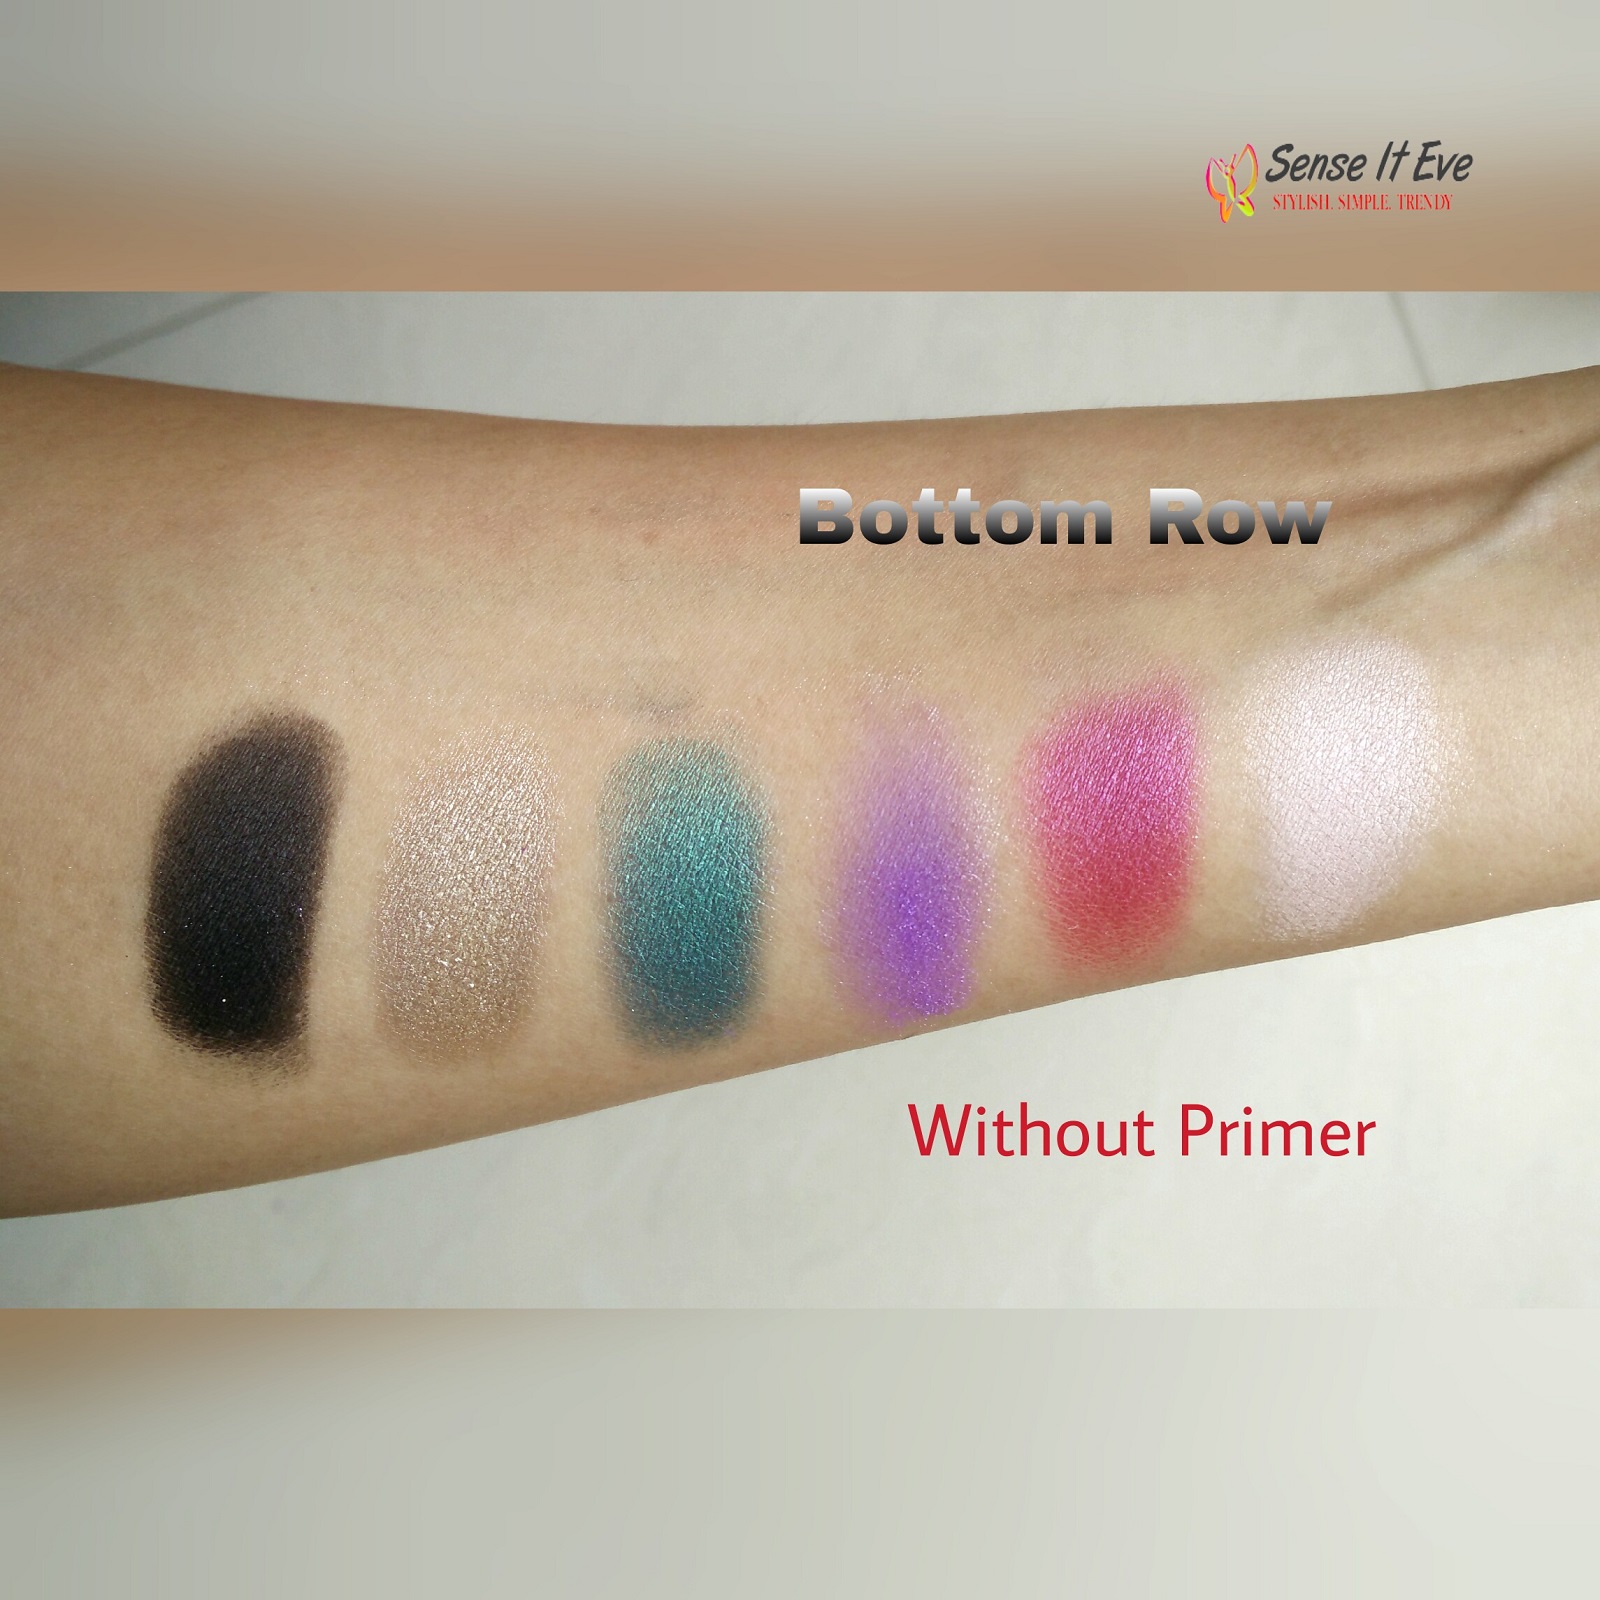 mua-glamour-nights-eye-shadow-palette-swatches-bottom-row-without-primer